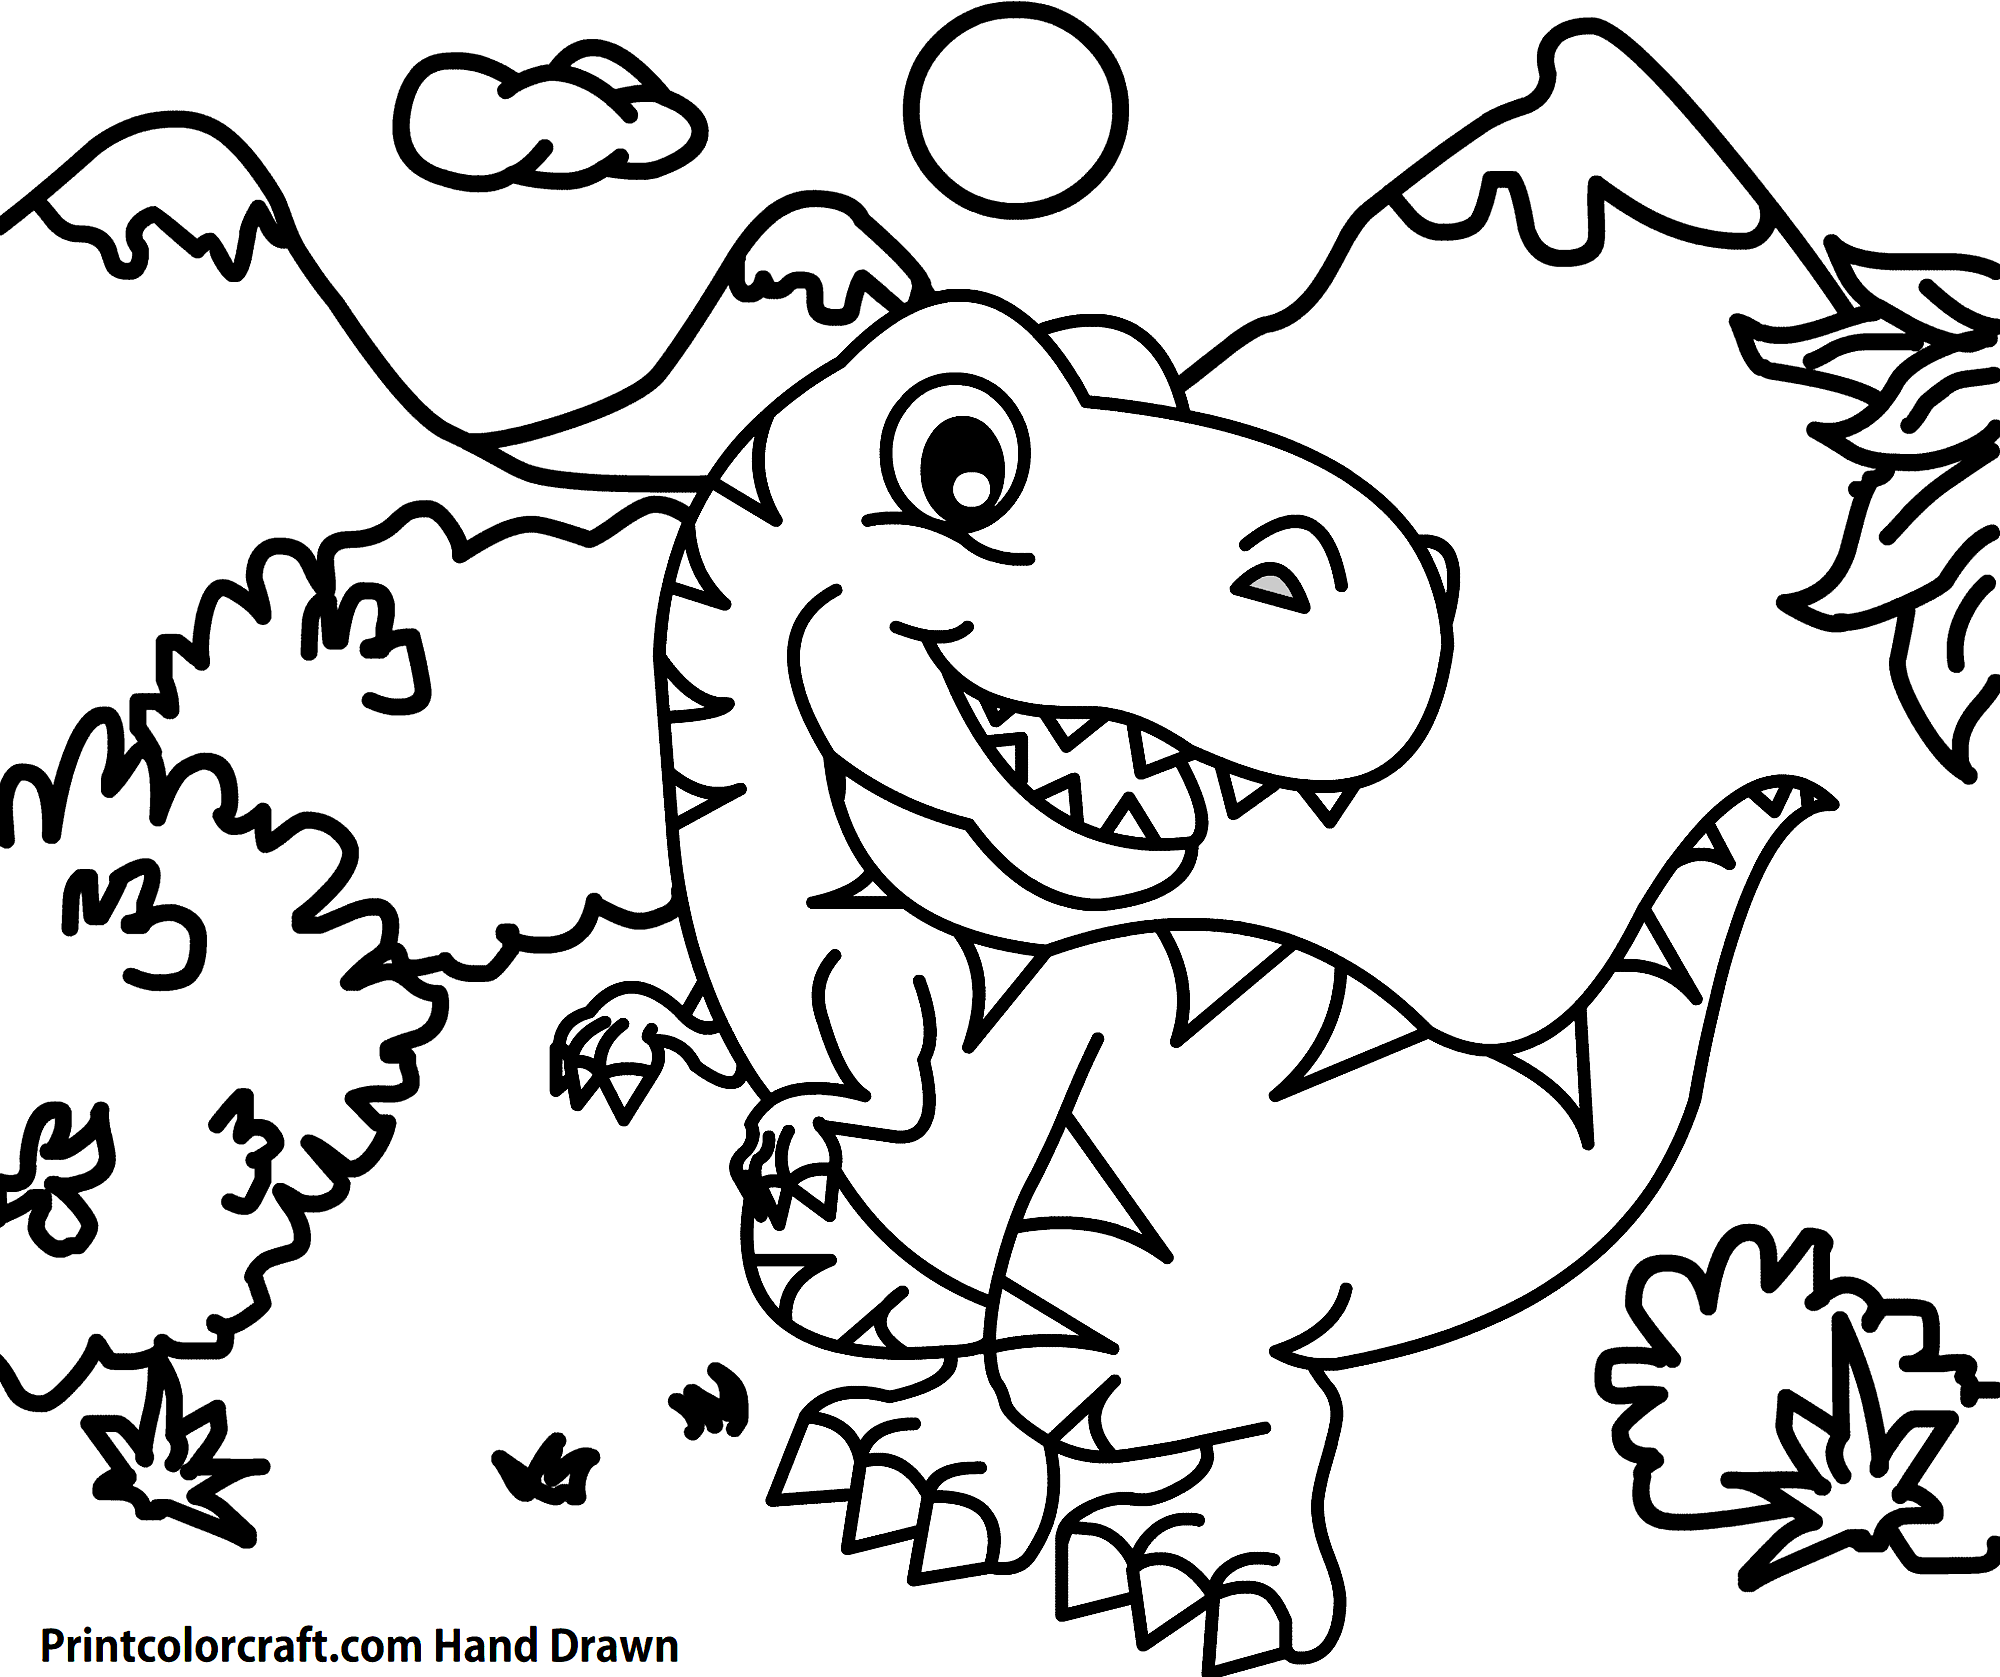 free-dinosaur-coloring-pages-for-download-printable-pdf-verbnow